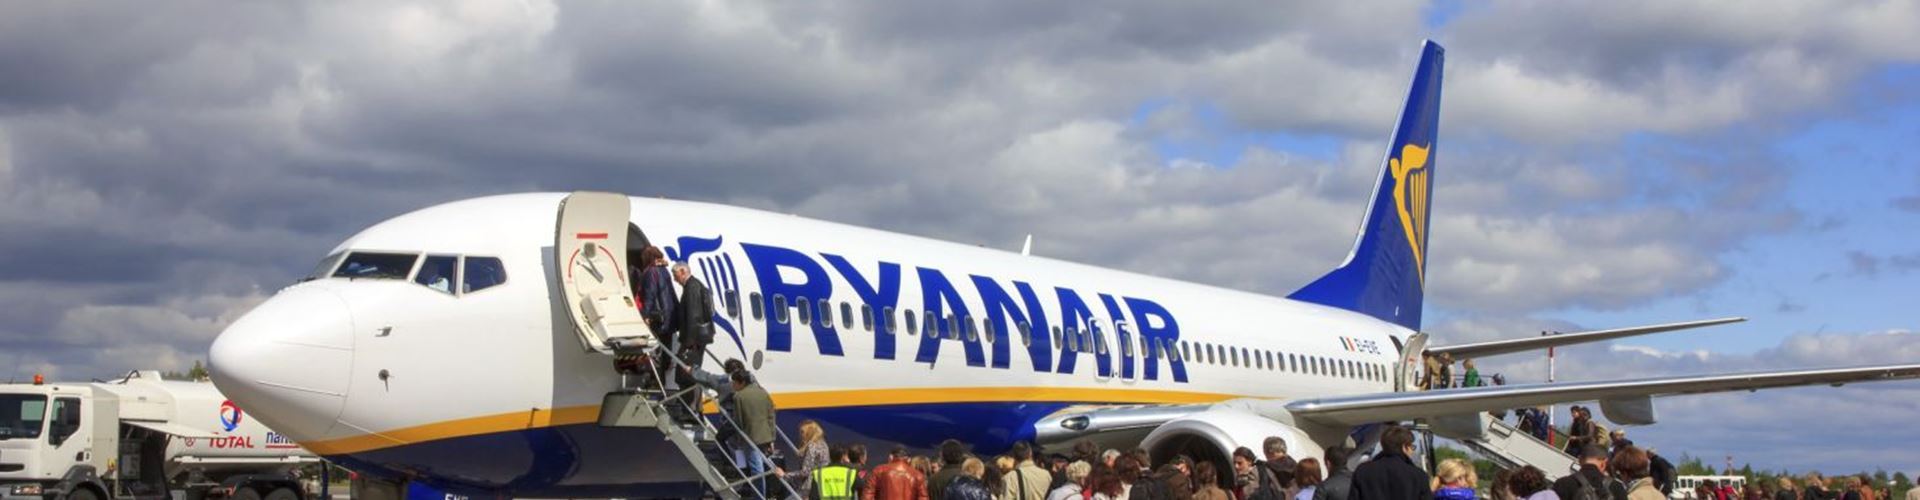 Ryanair launches no-frills business class